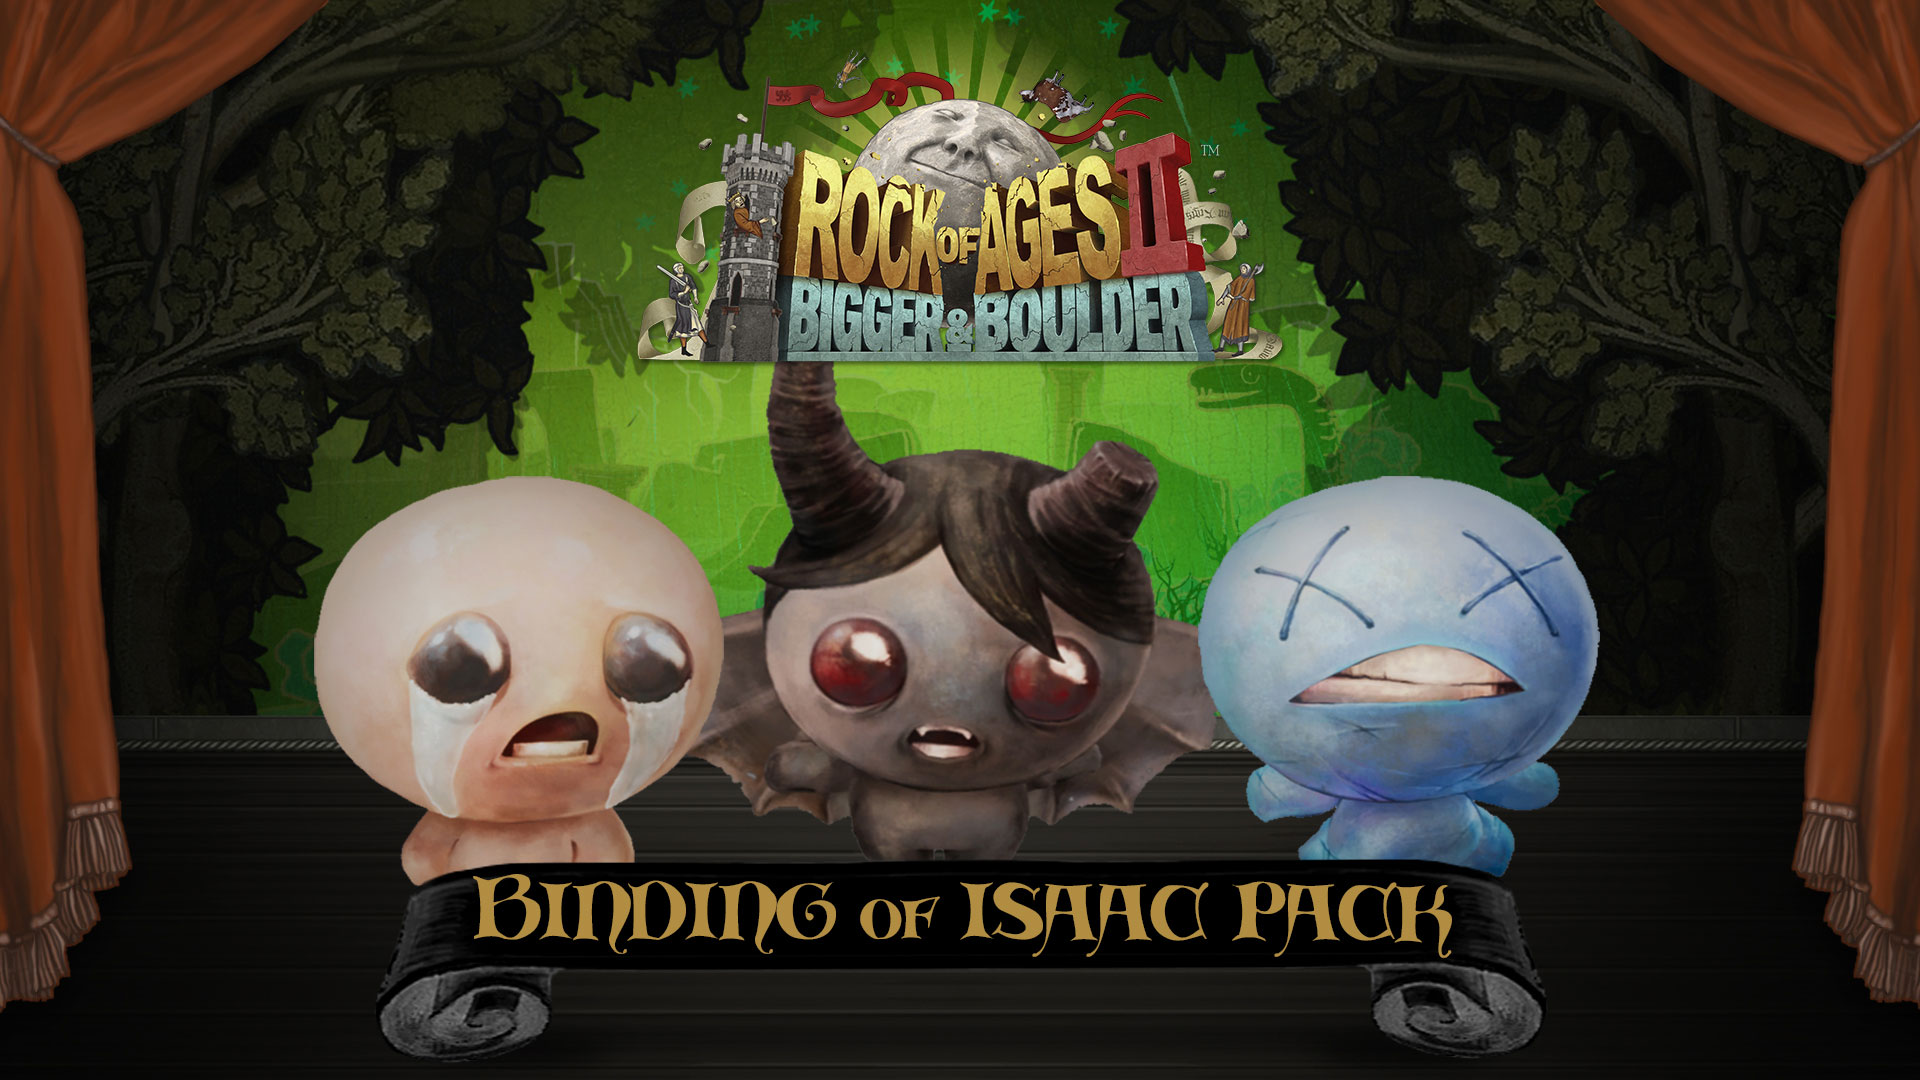 The Binding of Isaac Pack